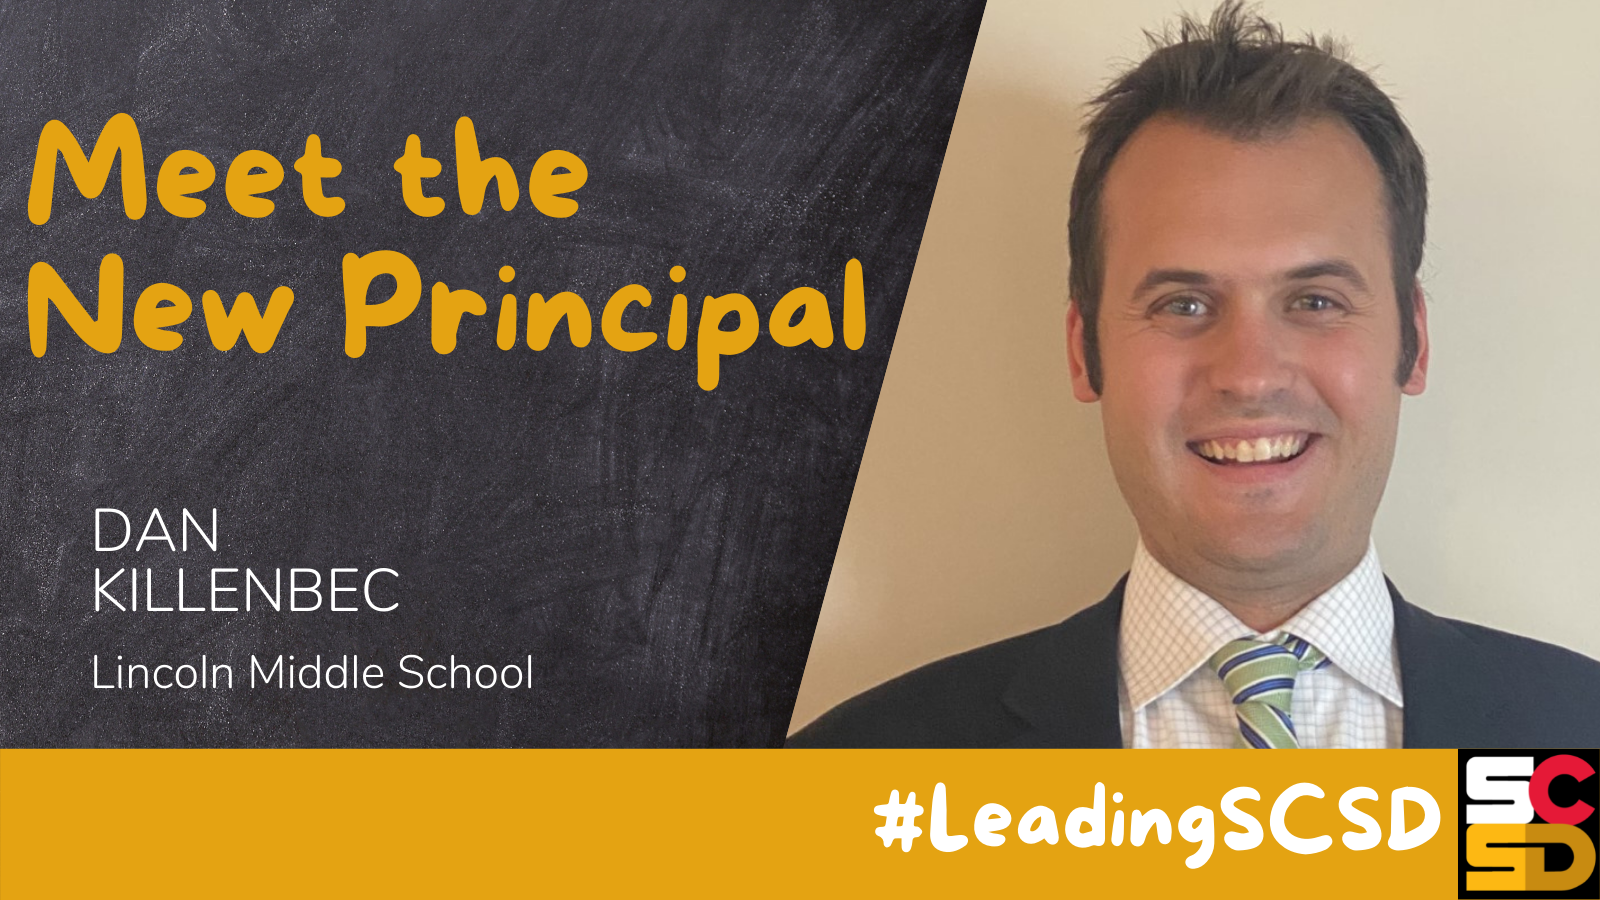 This is a graphic showing a photo of Lincoln Principal Dan Killenbec with text that reads "Meet the New Principal: Dan Killenbec"